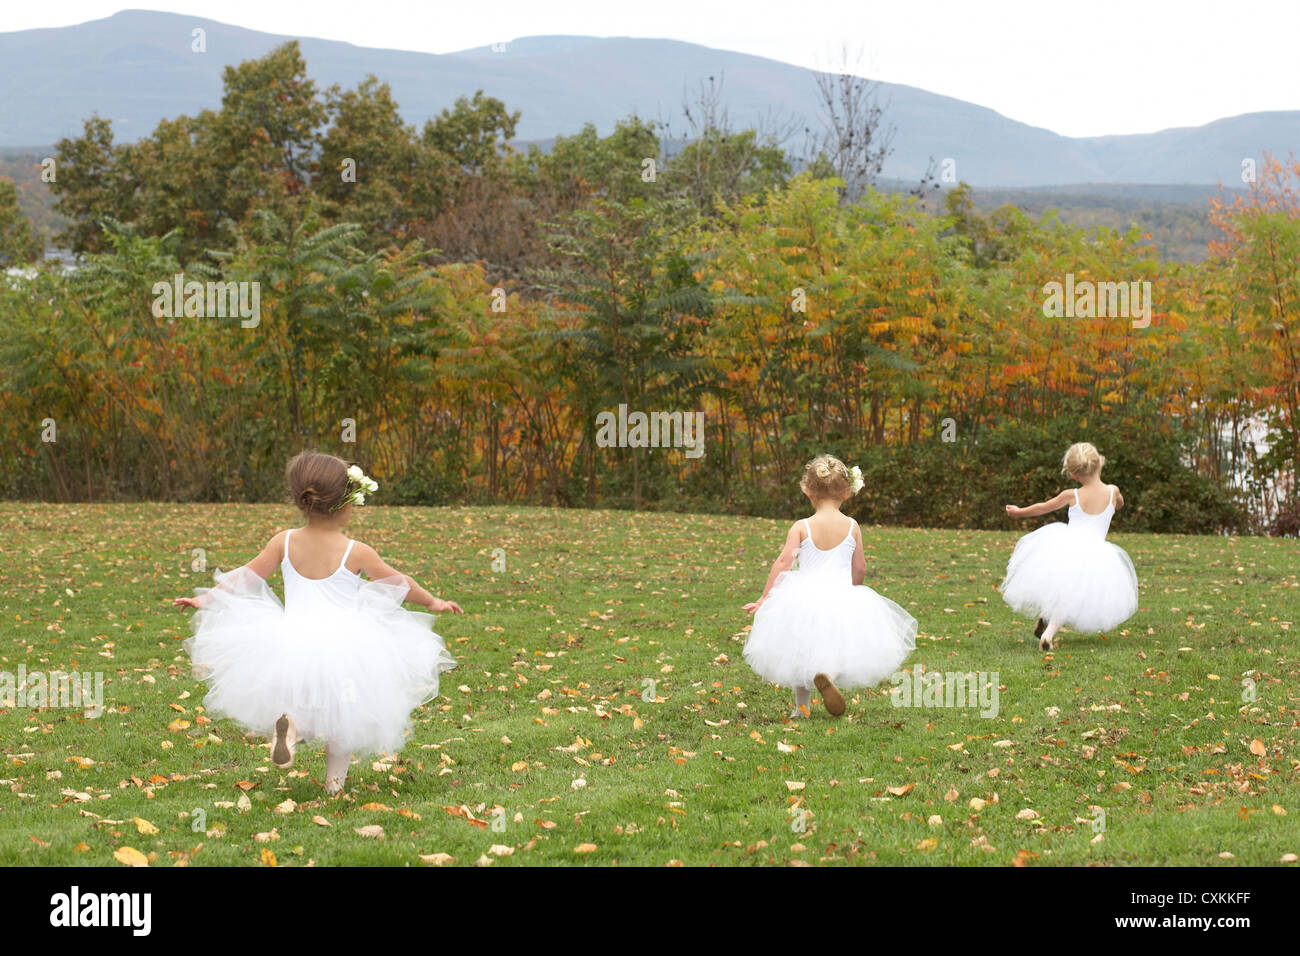 girls running in ballet costumes in a field Stock Photo